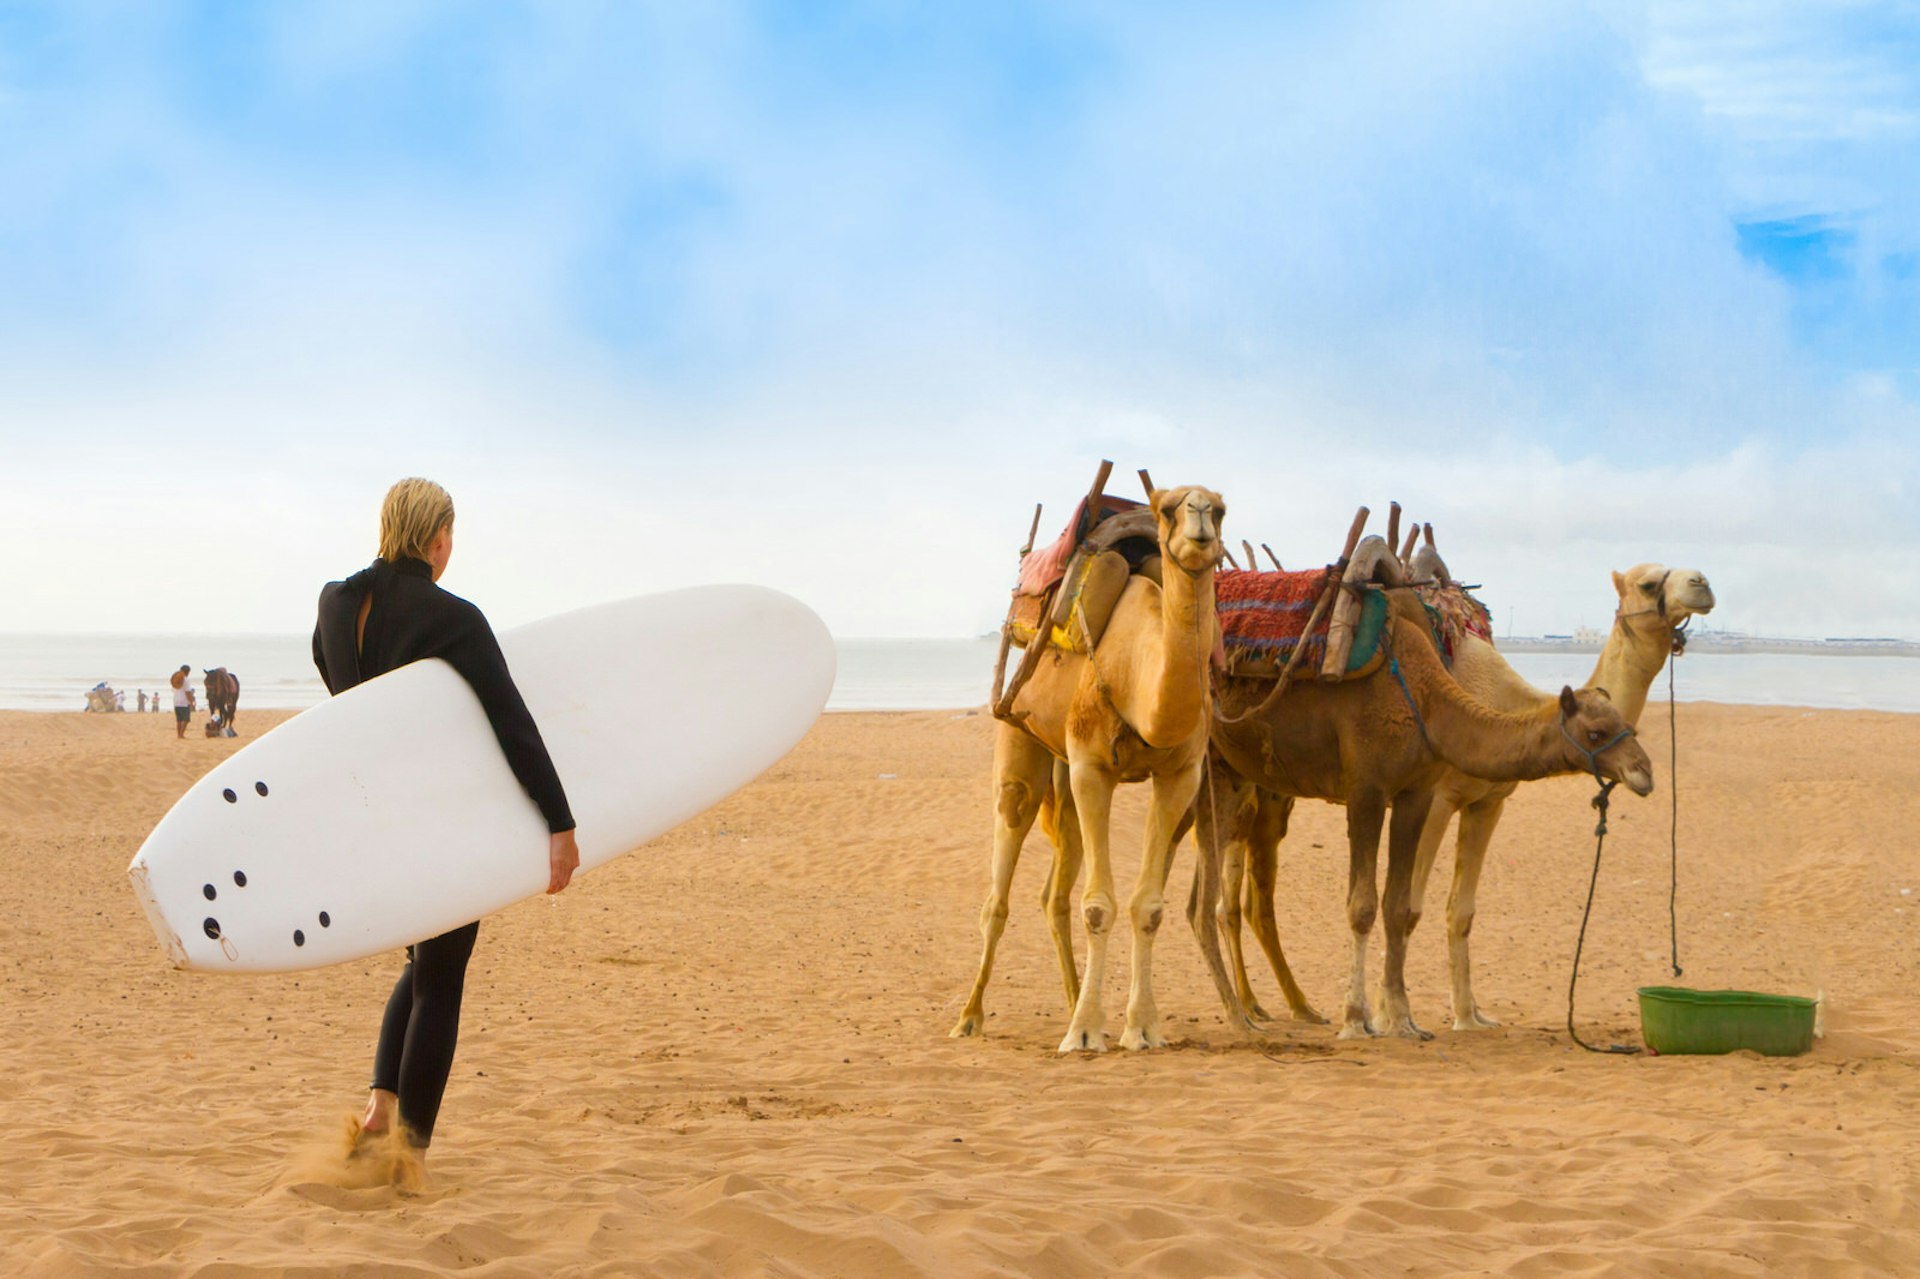 Surfer observes some camels on the beach in Essaouira © kasto80 / Getty Images